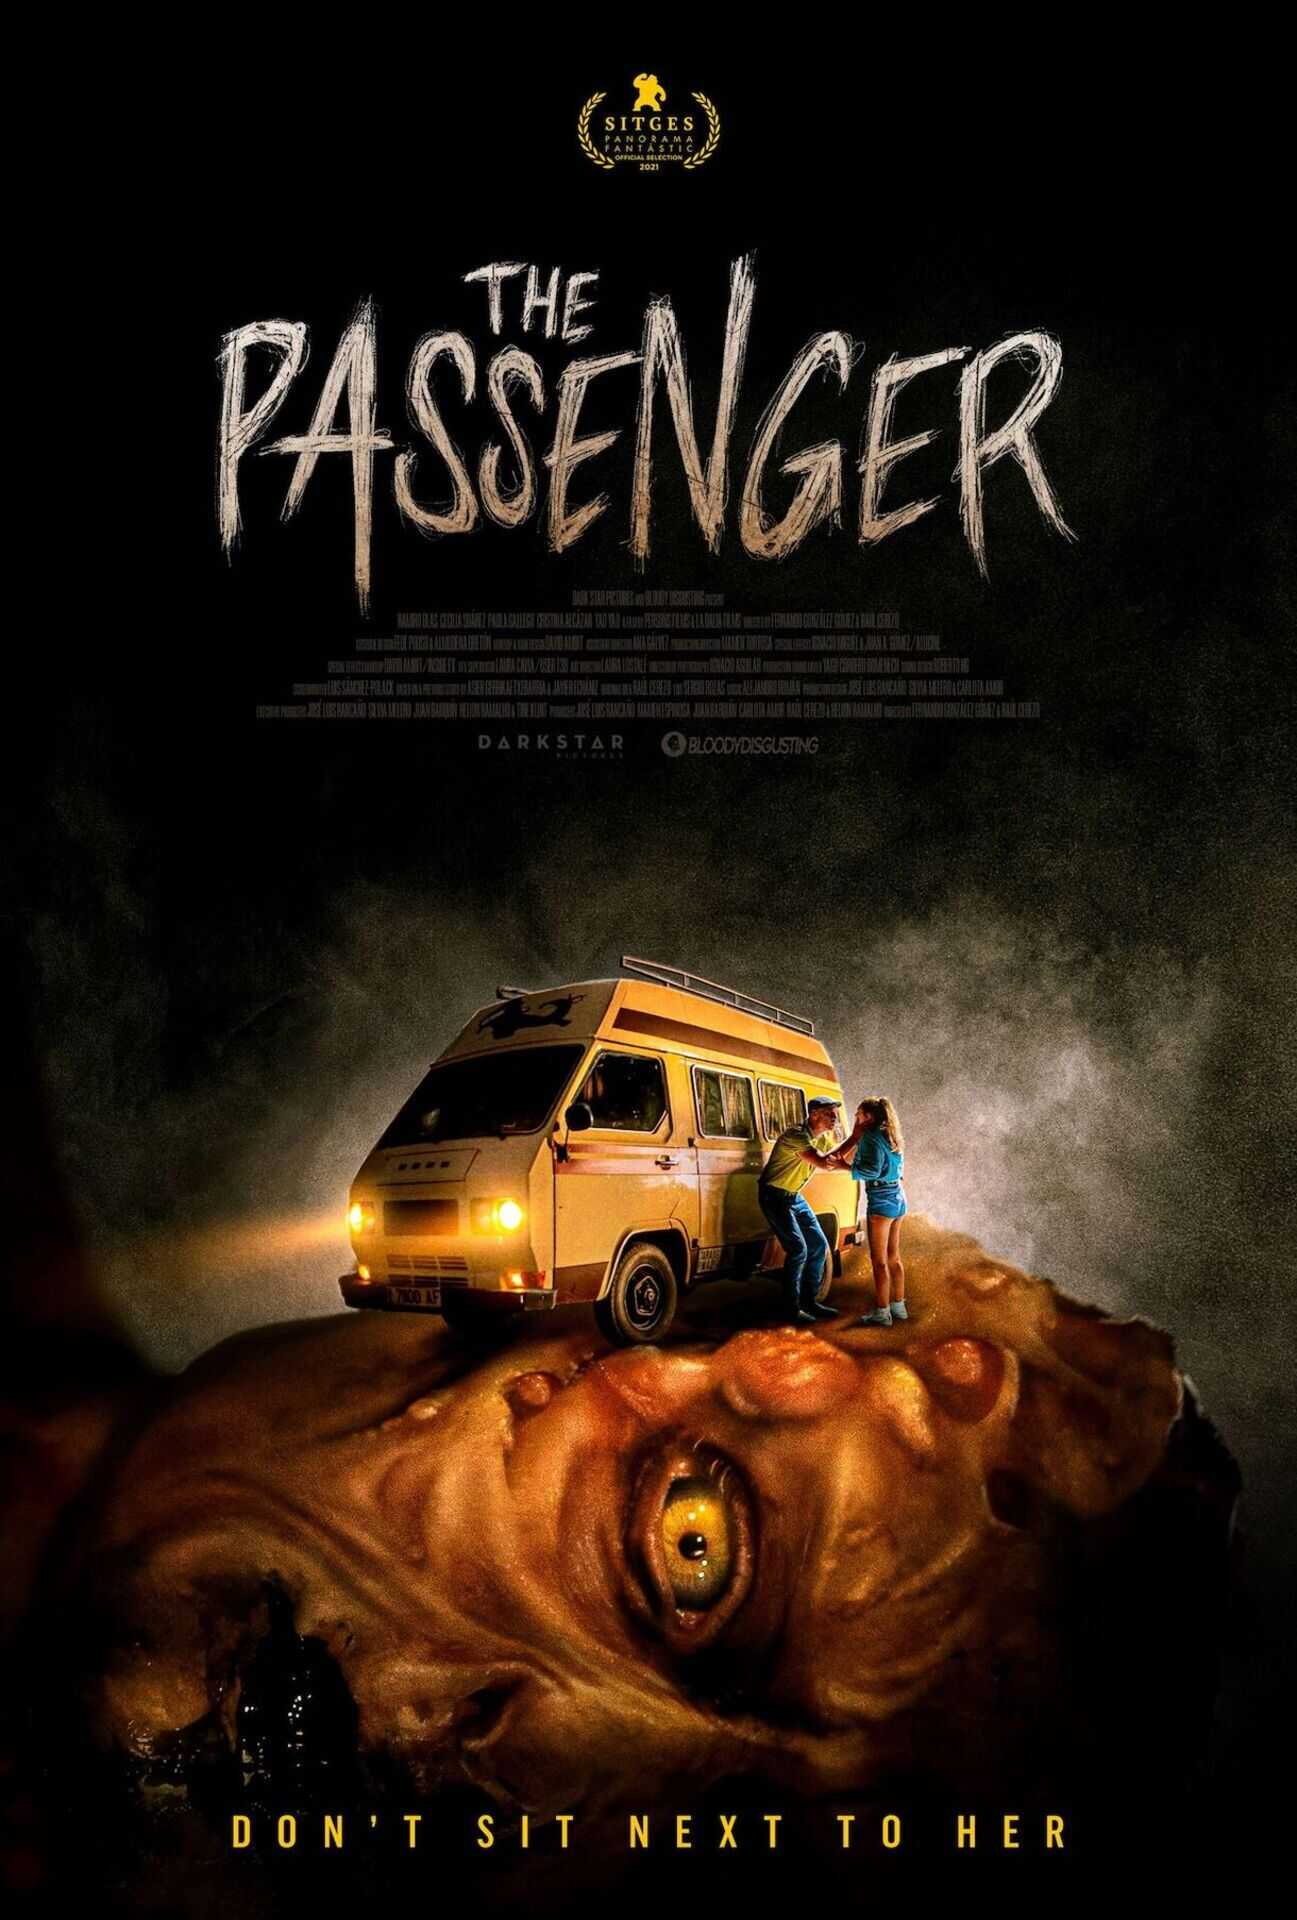 Theatrical poster for The Passenger. Courtesy of Dark Star Pictures and Bloody Disgusting.